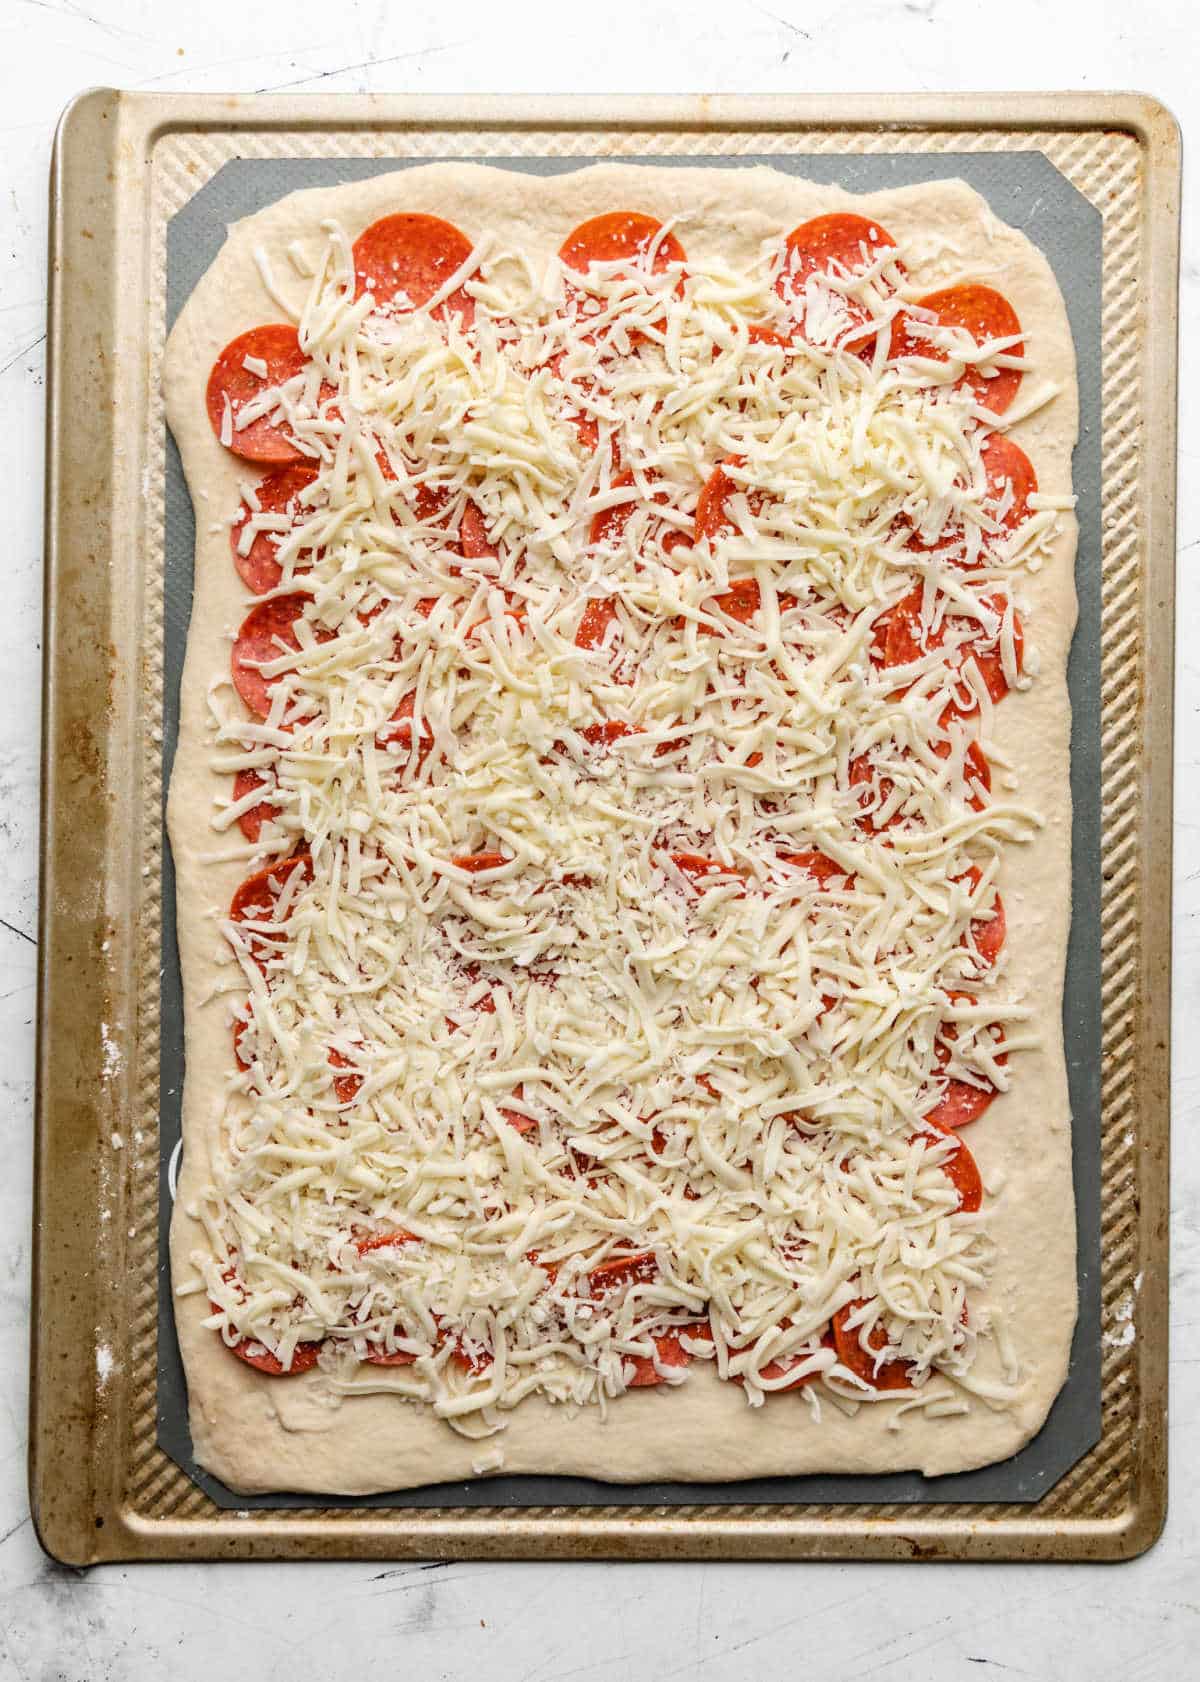 A layer of shredded mozzarella over pepperonis on pizza dough.